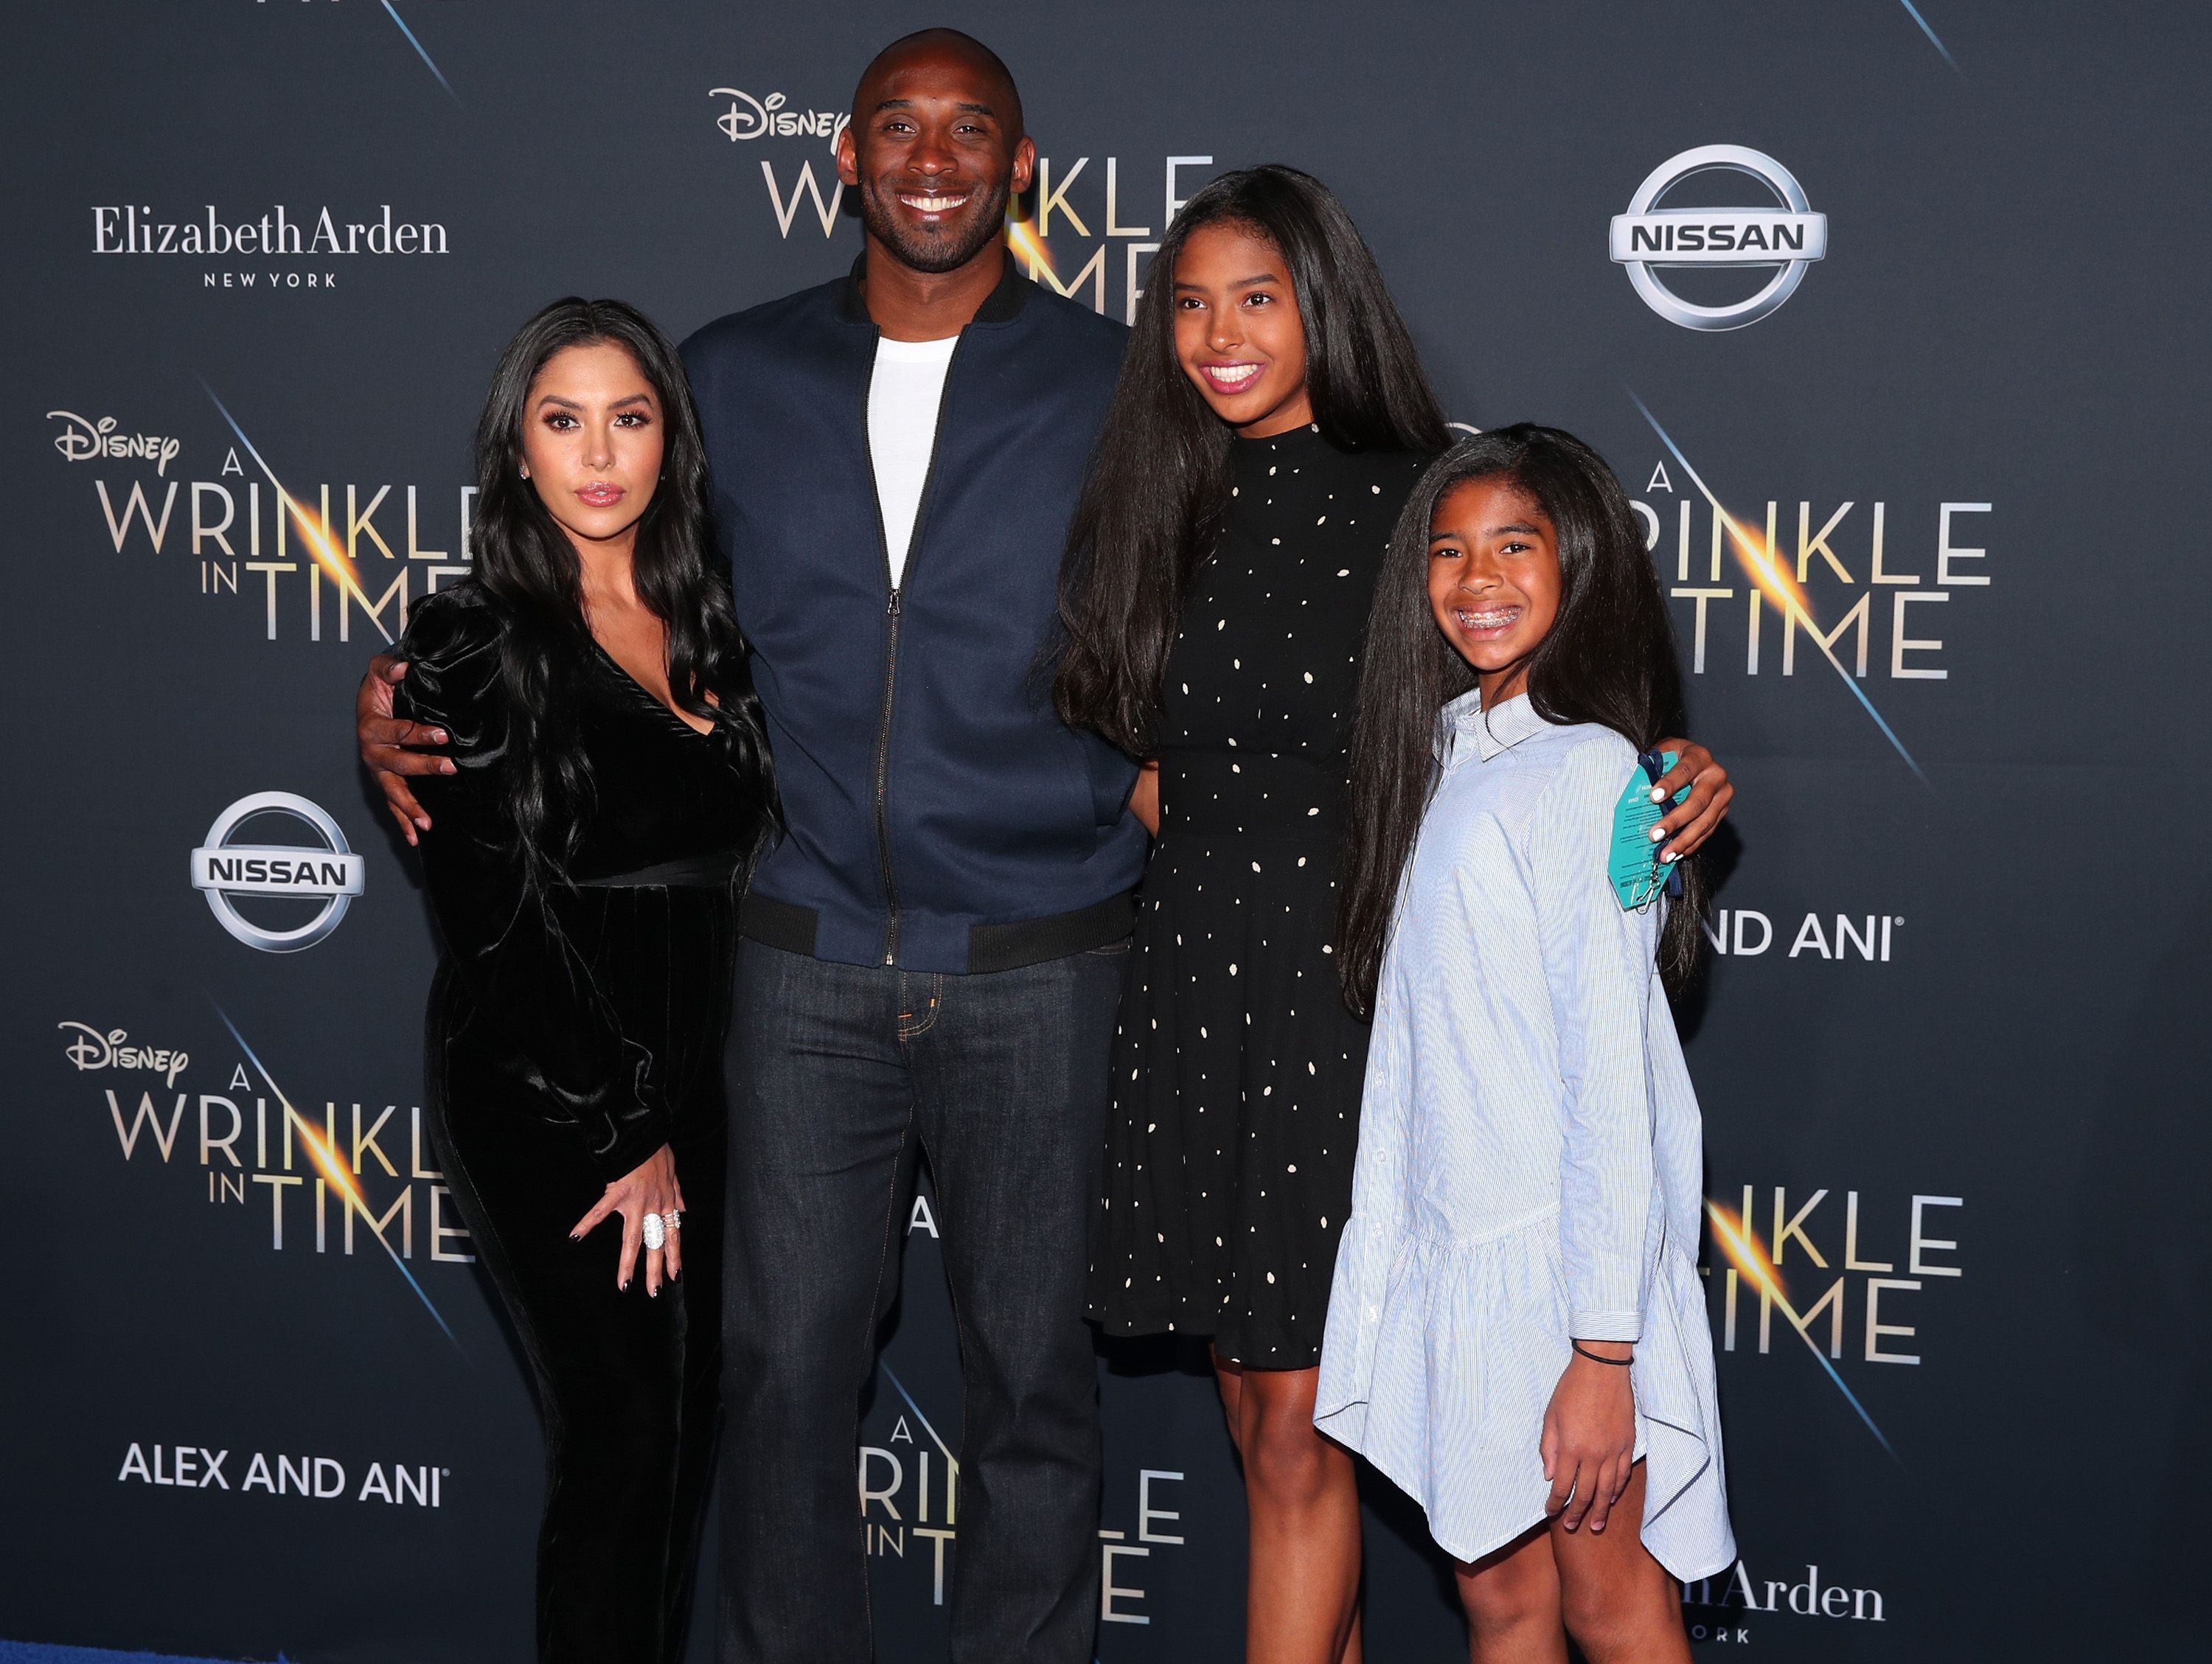 Vanessa, Kobe, Natalia, and Gianna Bryant at the premiere of "A Wrinkle In Time" on February 26, 2018, in Los Angeles, California | Photo: Christopher Polk/Getty Images